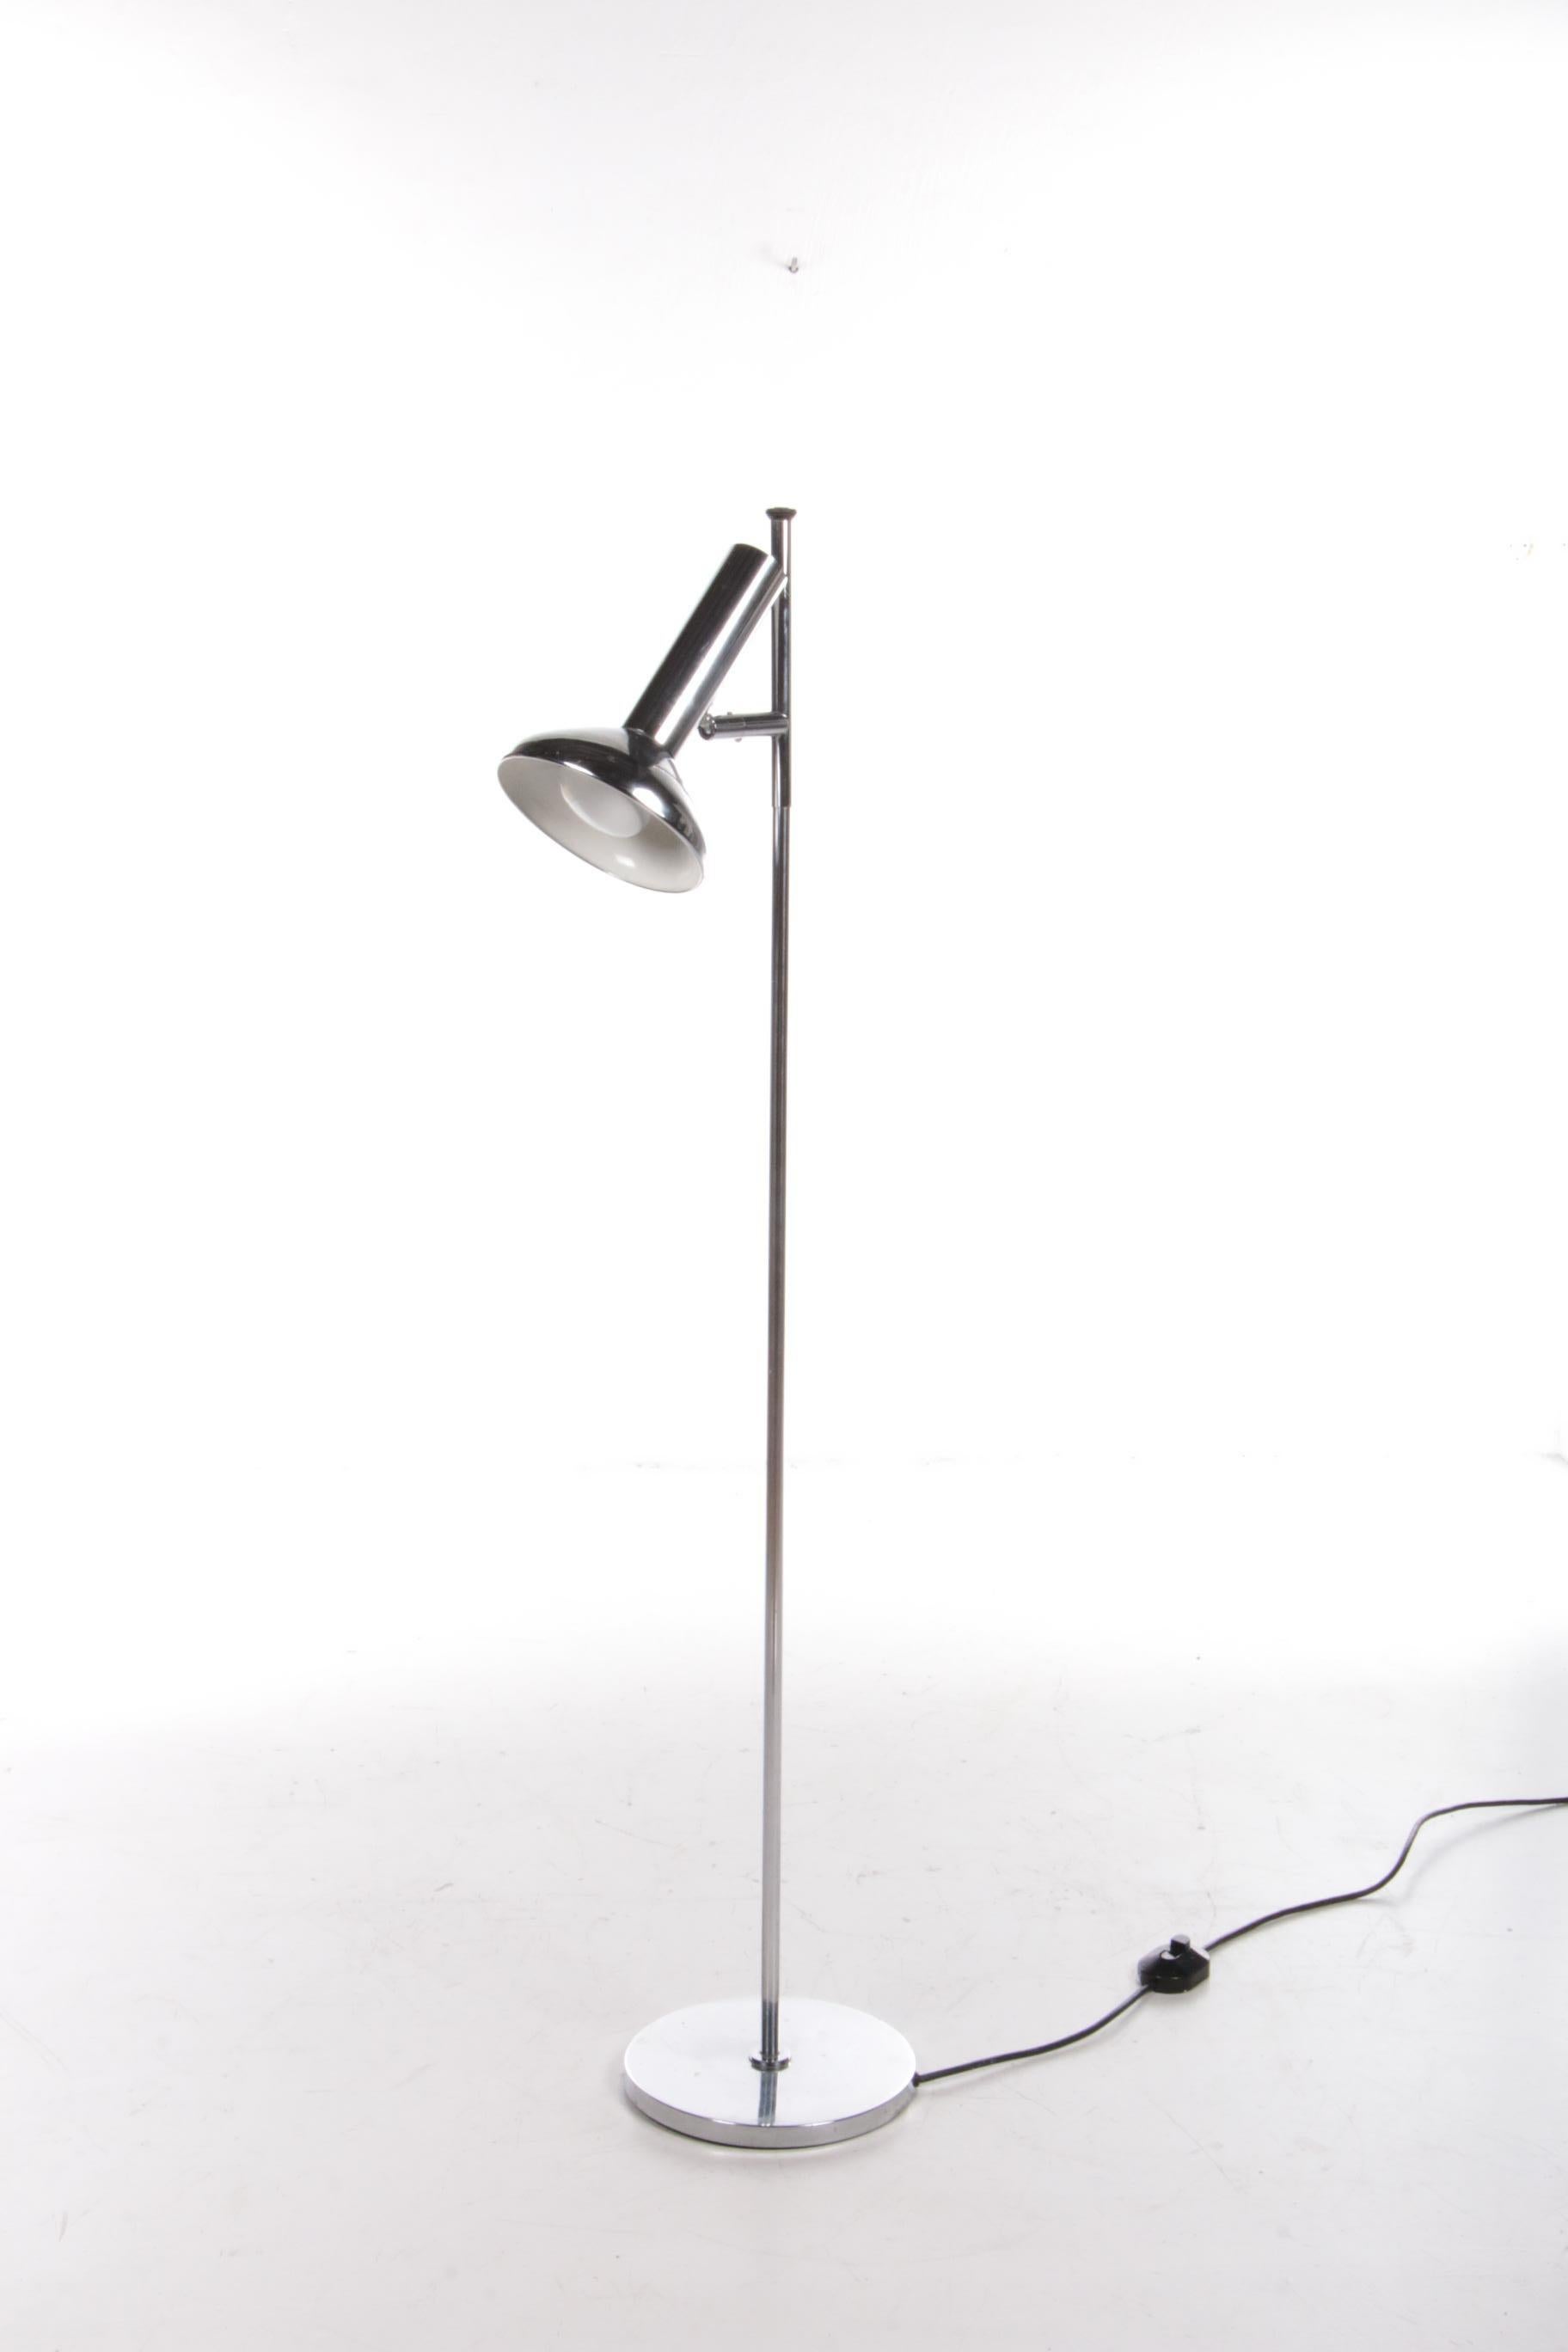 Vintage chrome floor lamp with adjustable spot, 1960s German.


This is a beautiful chrome floor lamp with adjustable spot.

Made of chrome.

Very nice quality for this lamp from the 1960s,

Has withstood the test of time very well and has